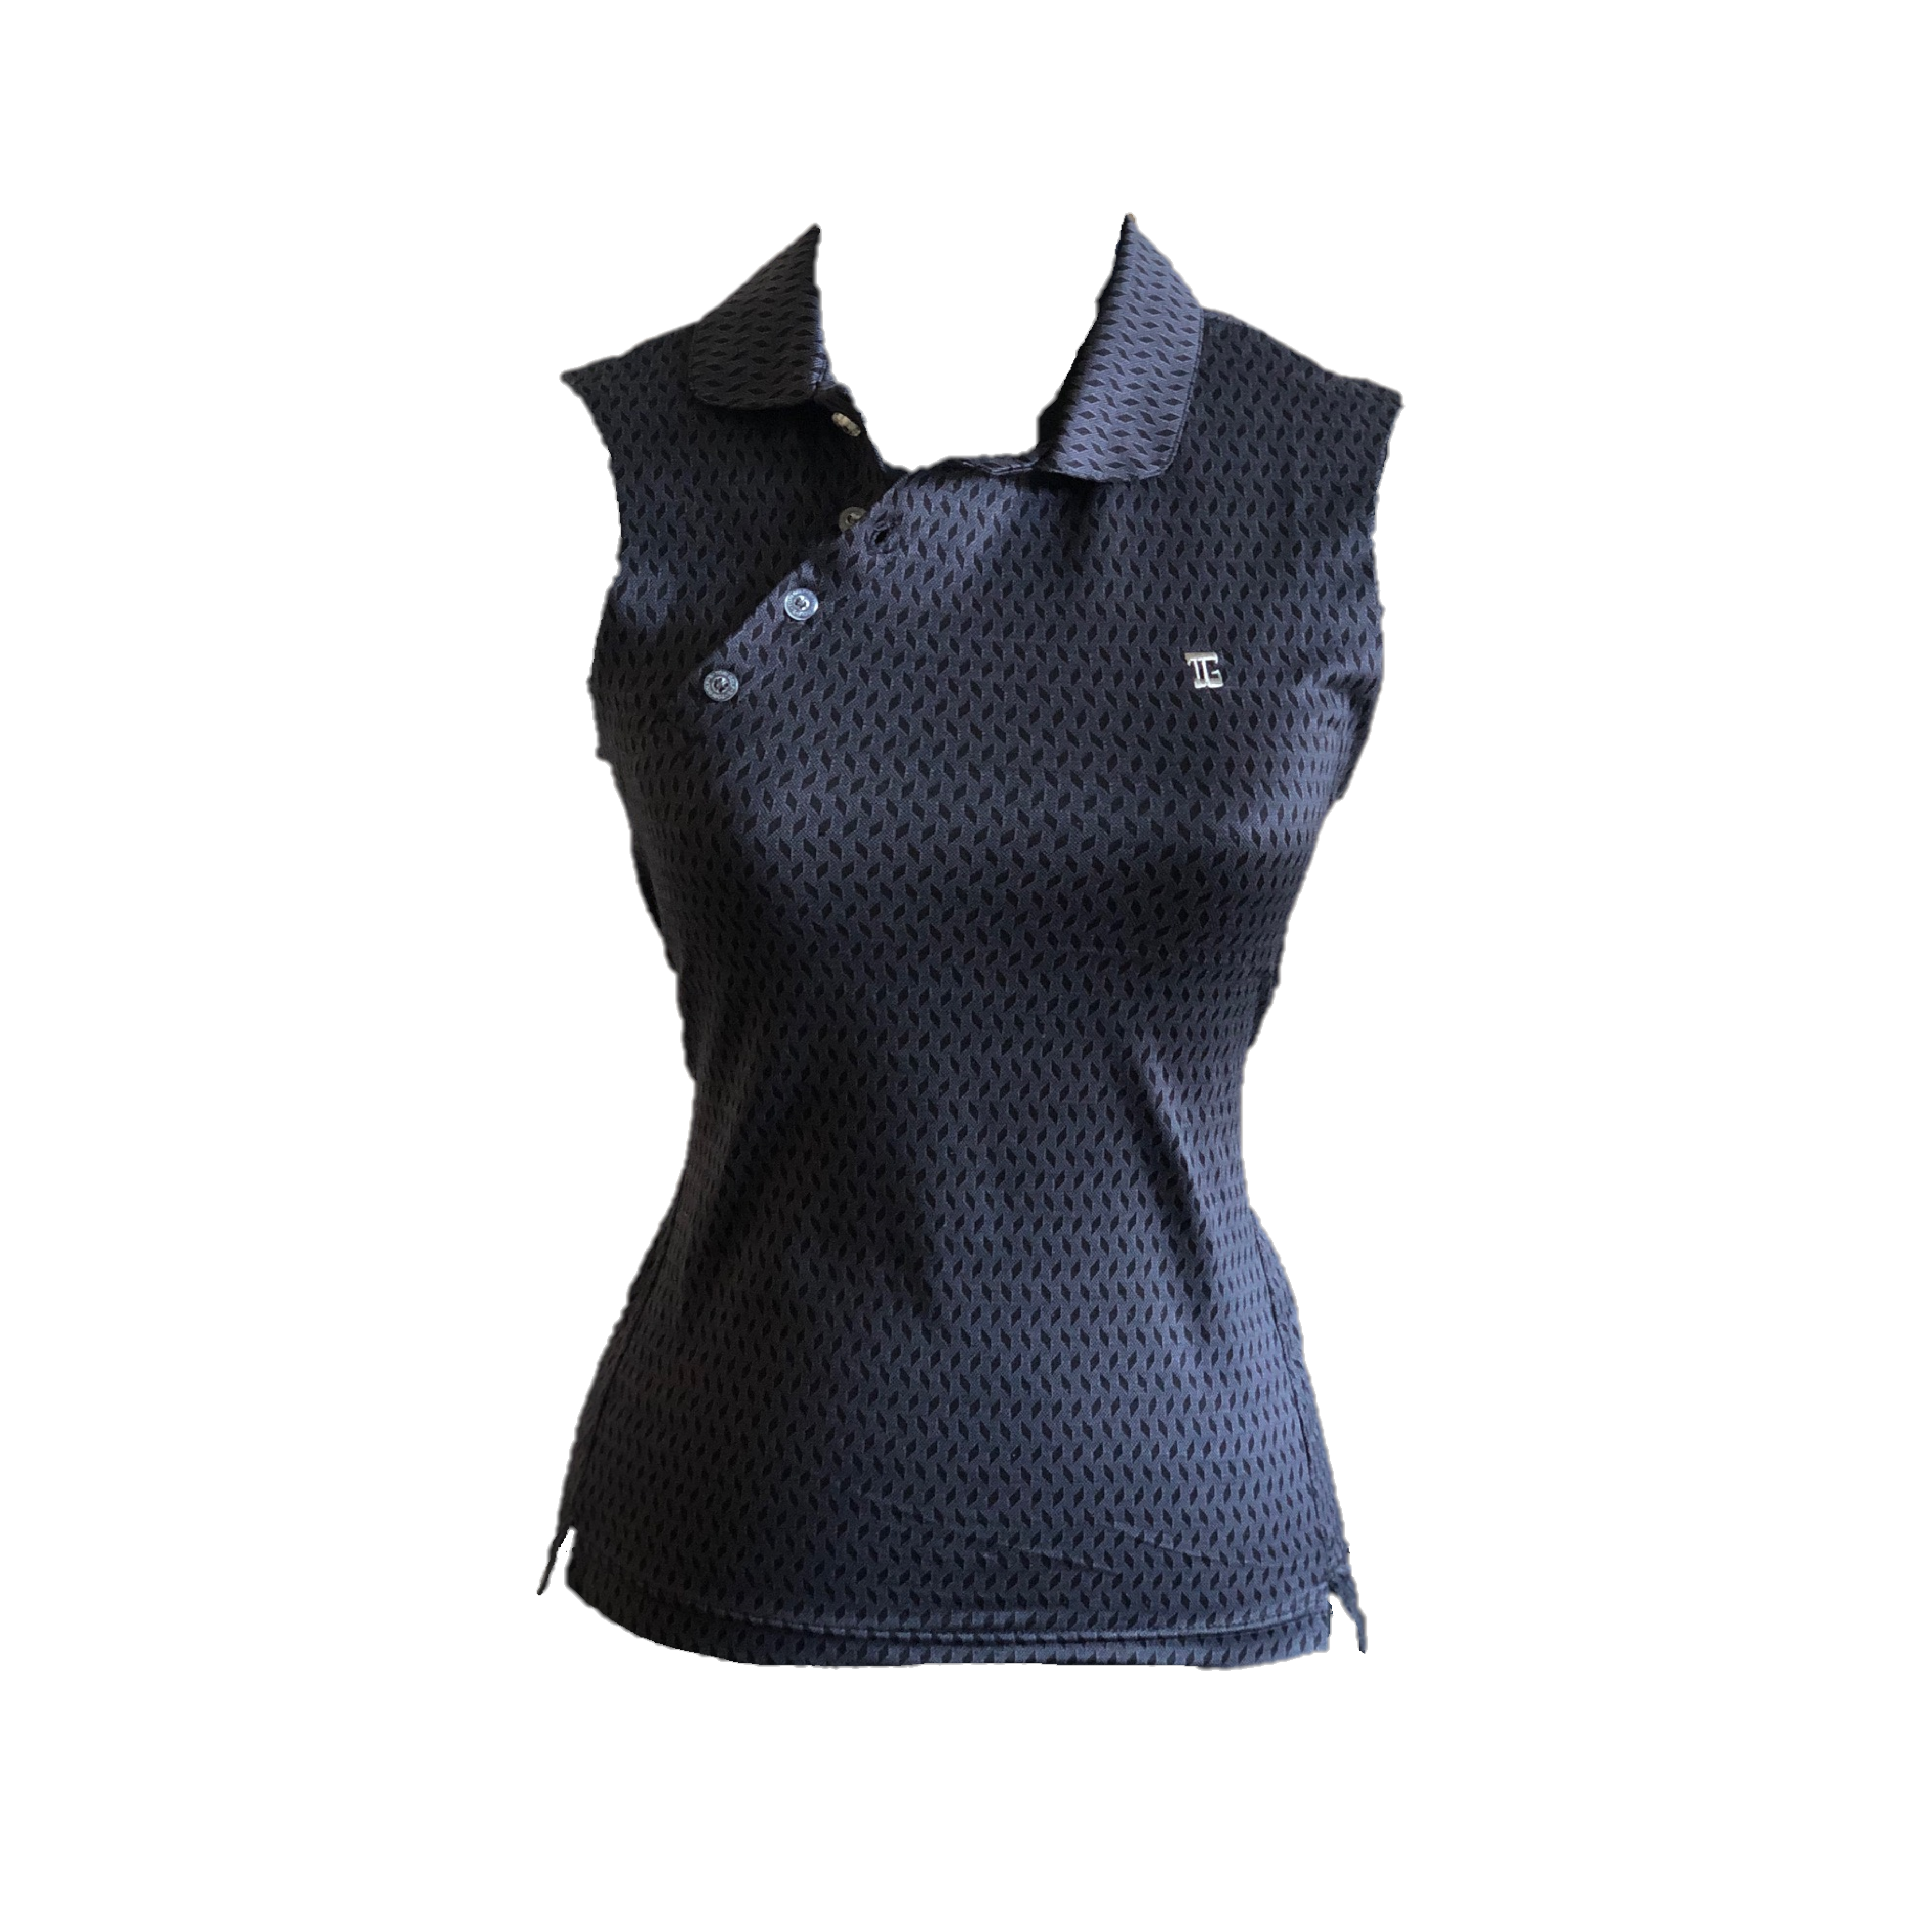 LT-091 || Ladies Sleeveless Top Dark Charcoal with Black Geometric Pattern Angled 4 Button Neck